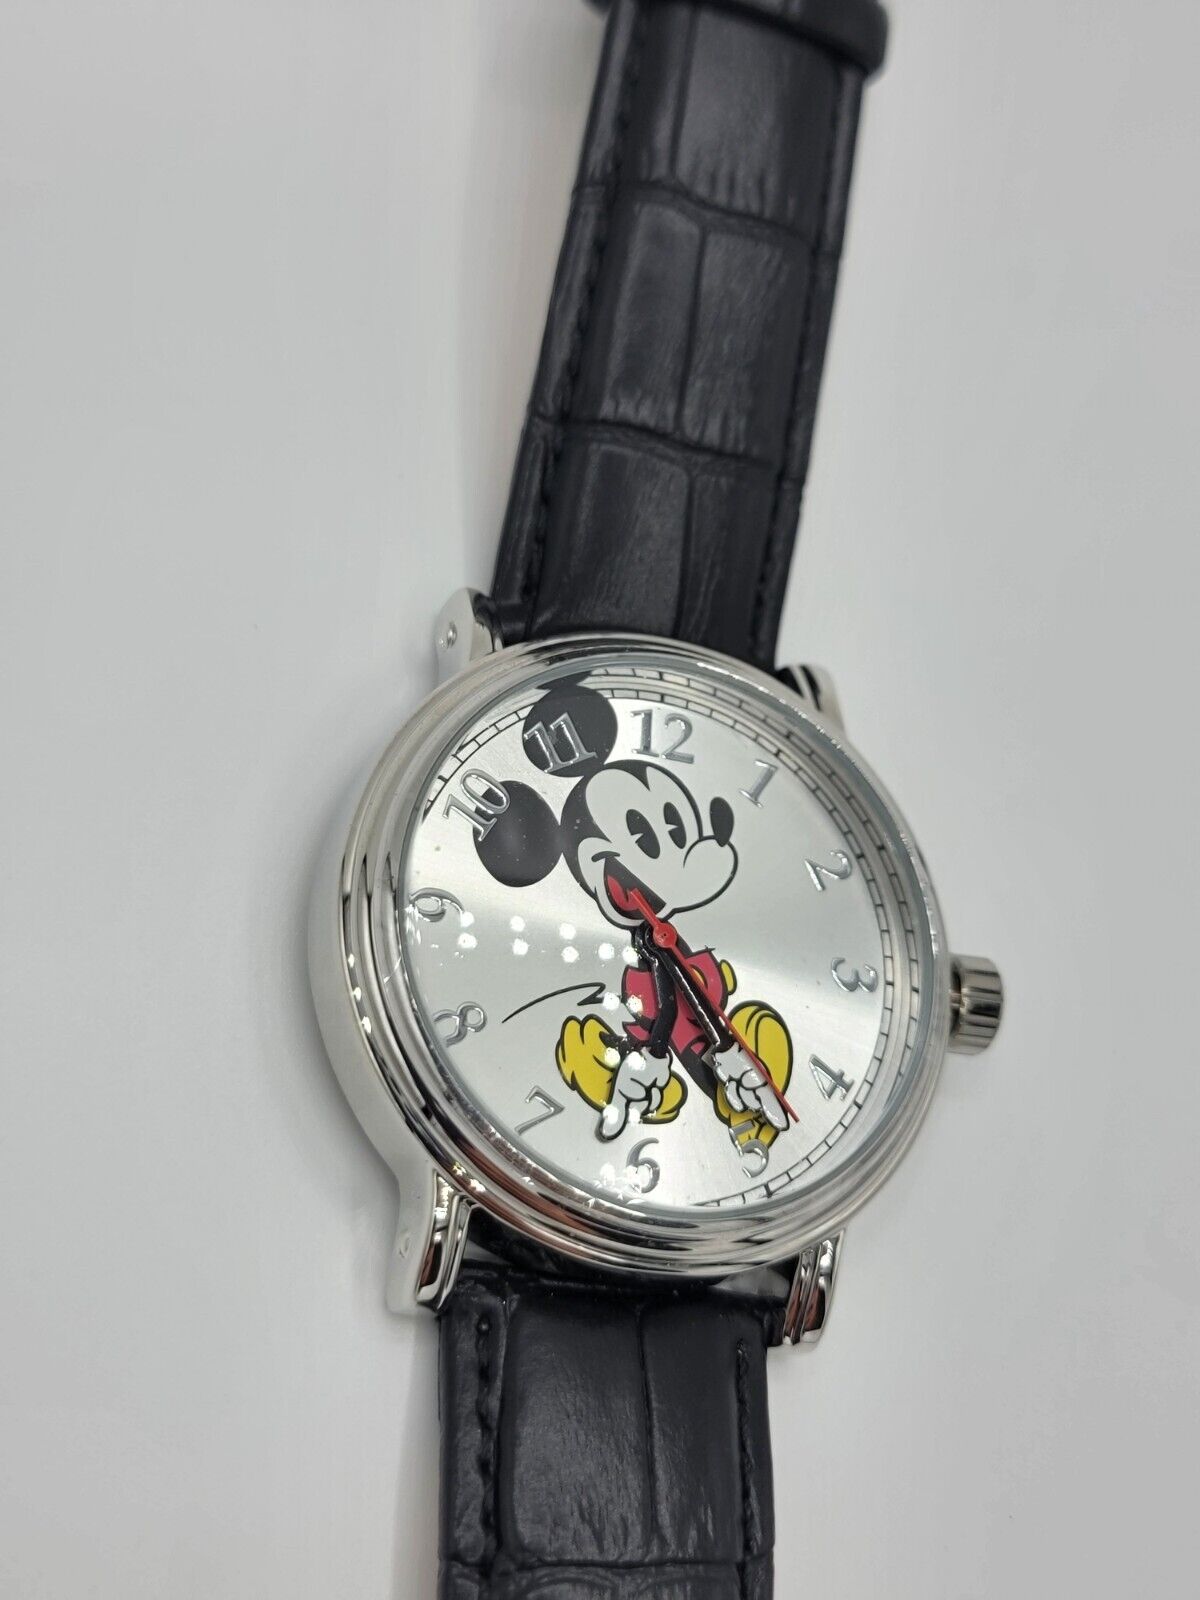 Disney Mickey Mouse Adult Vintage Articulating Hands Analog Quartz Watch